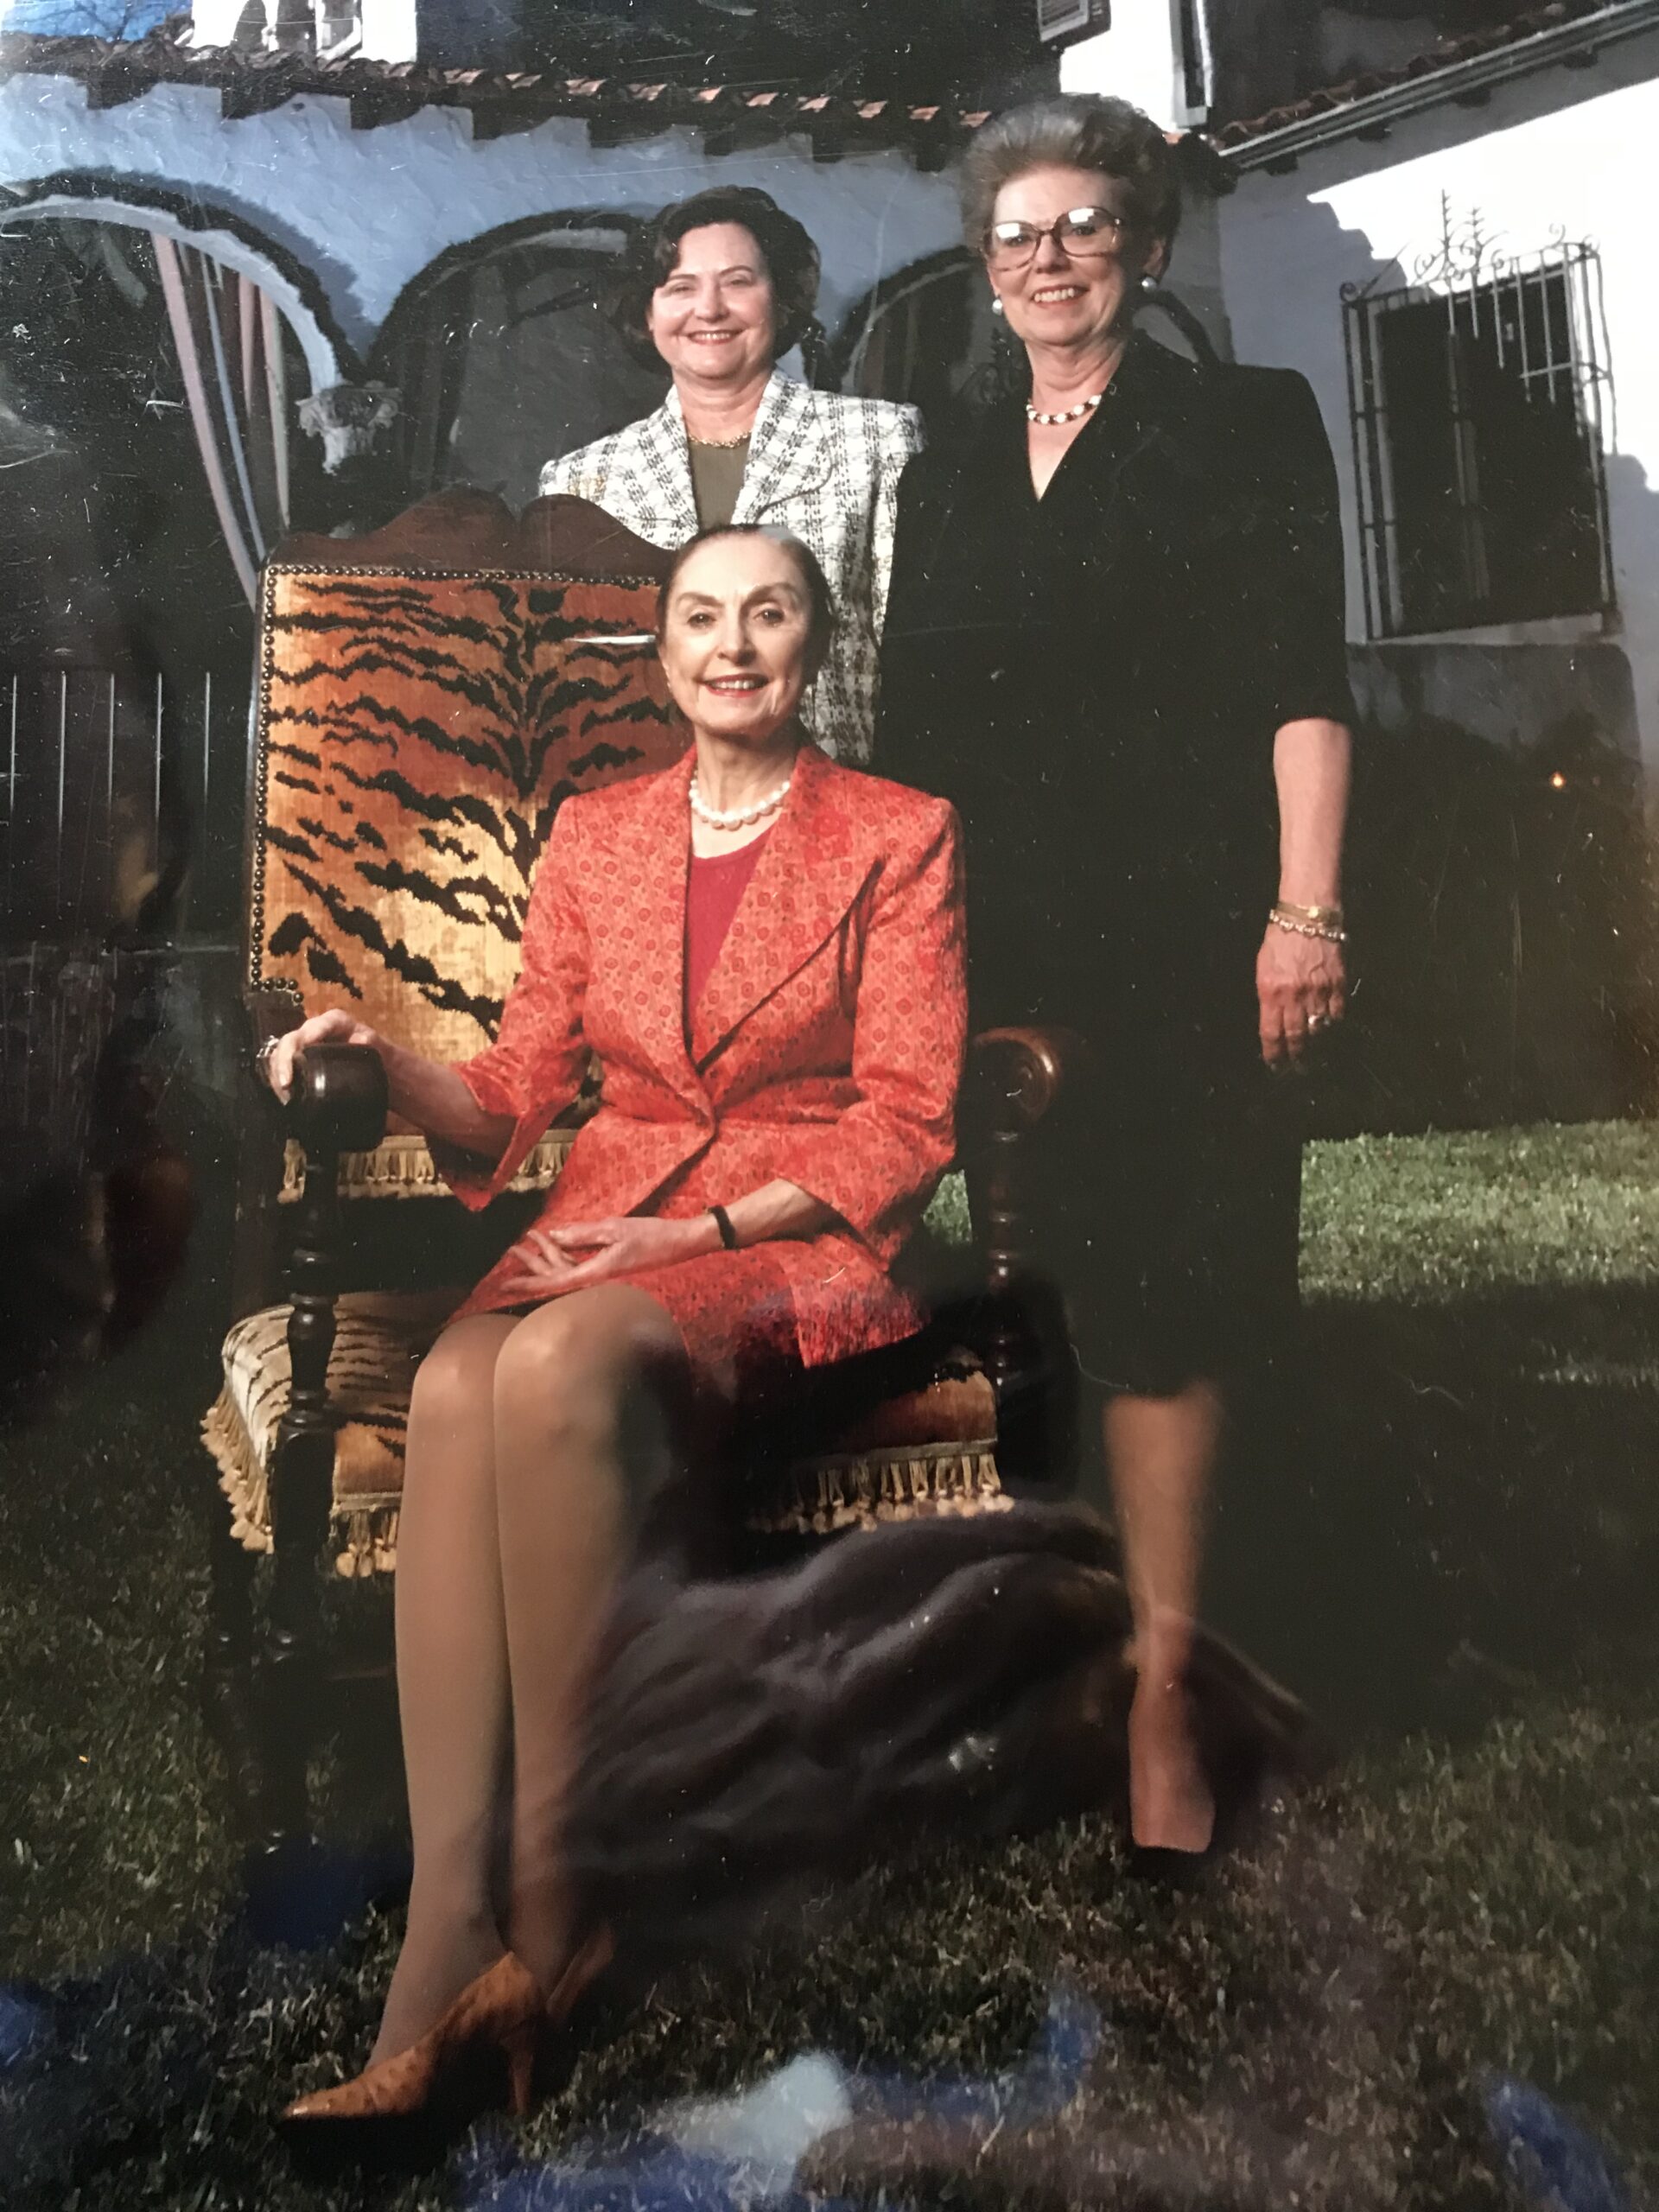 “The Three J’s” will be award recipients at the Long Center’s Icon Awards Ceremony on March 27. Seated: Jane Sibley. Standing: Jare Smith, Jo Anne Christian.